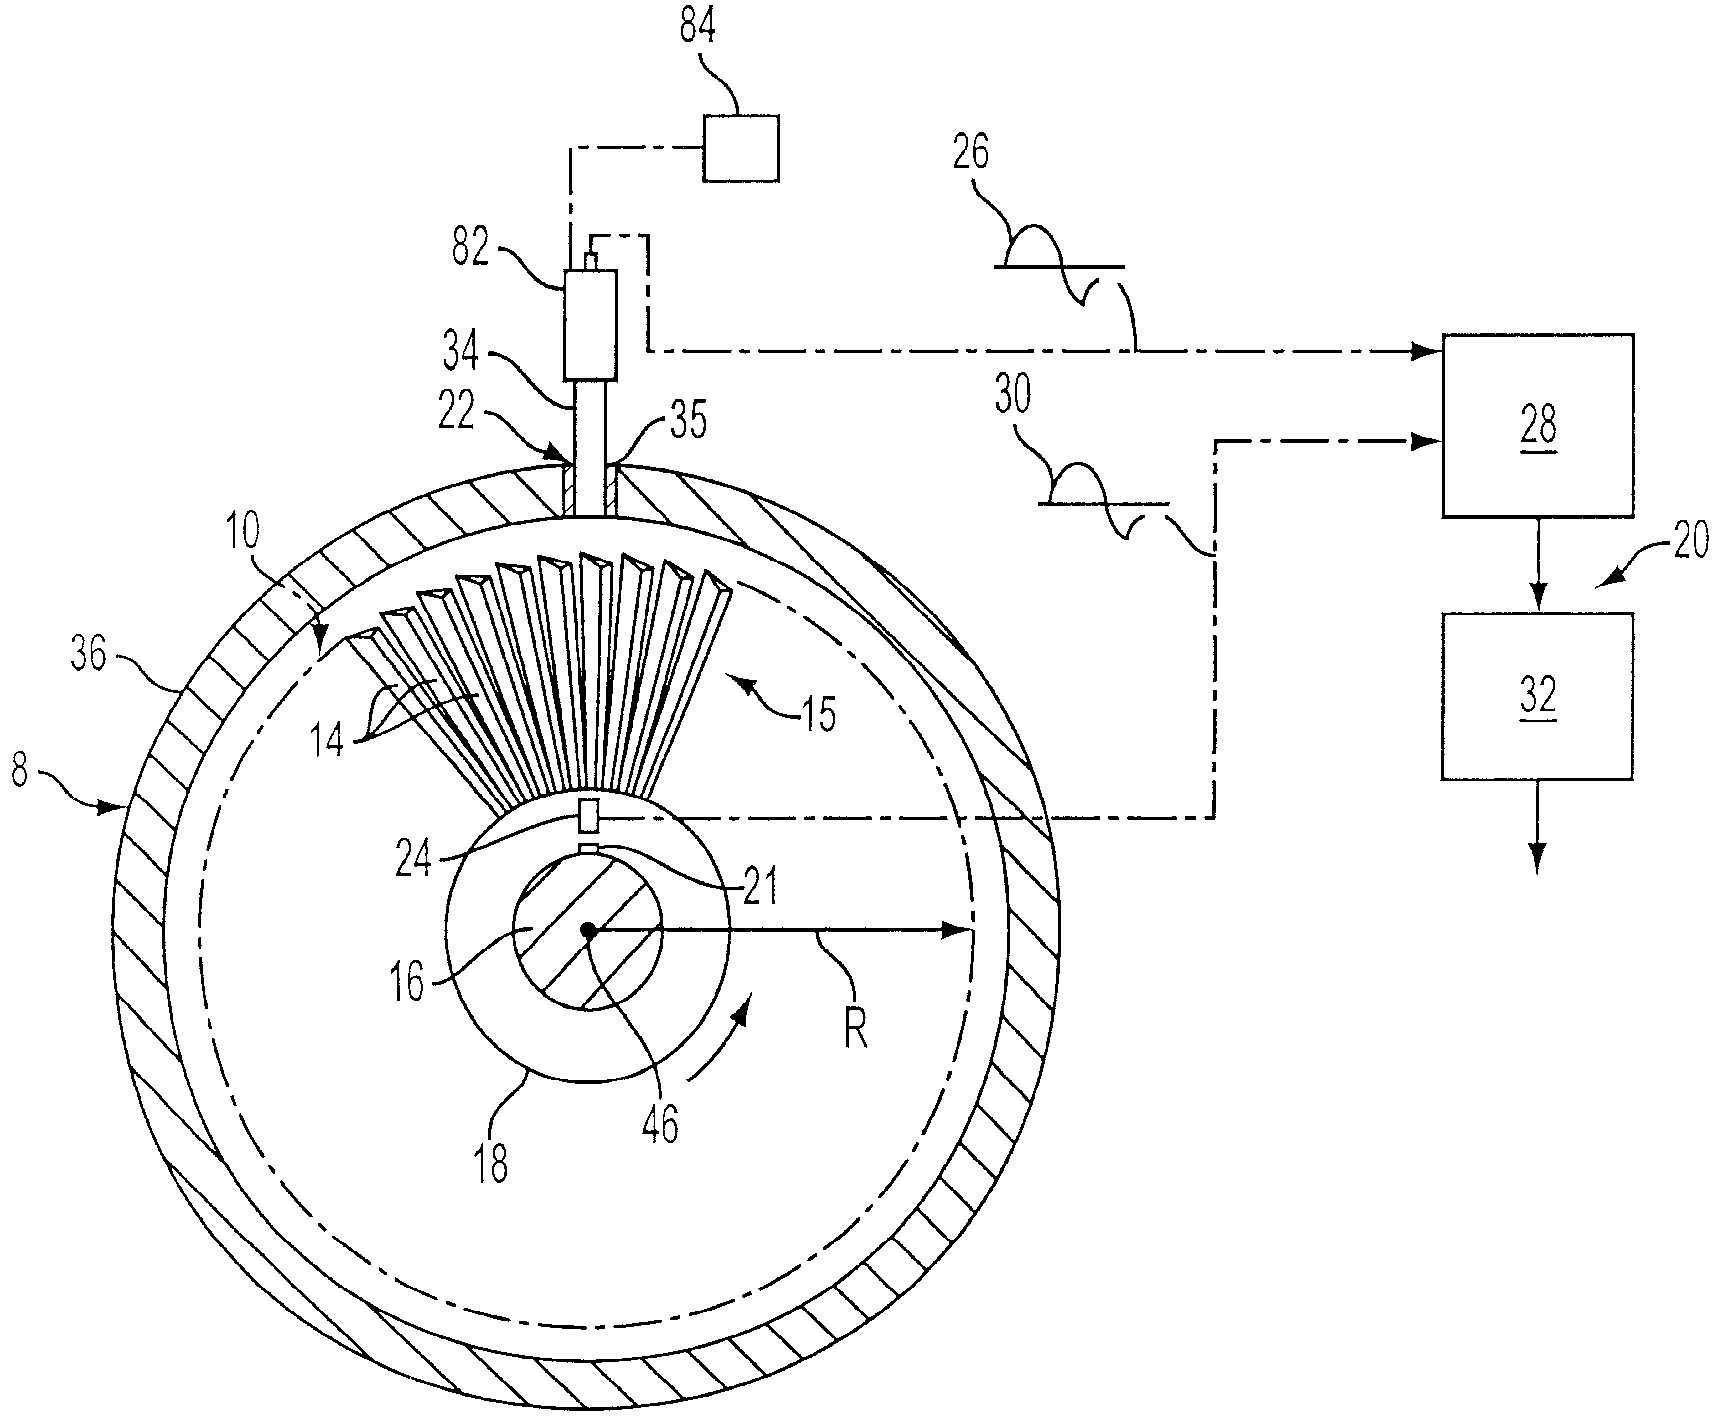 Method and Apparatus for Tracking a Rotating Blade Tip for Blade Vibration Monitor Measurements